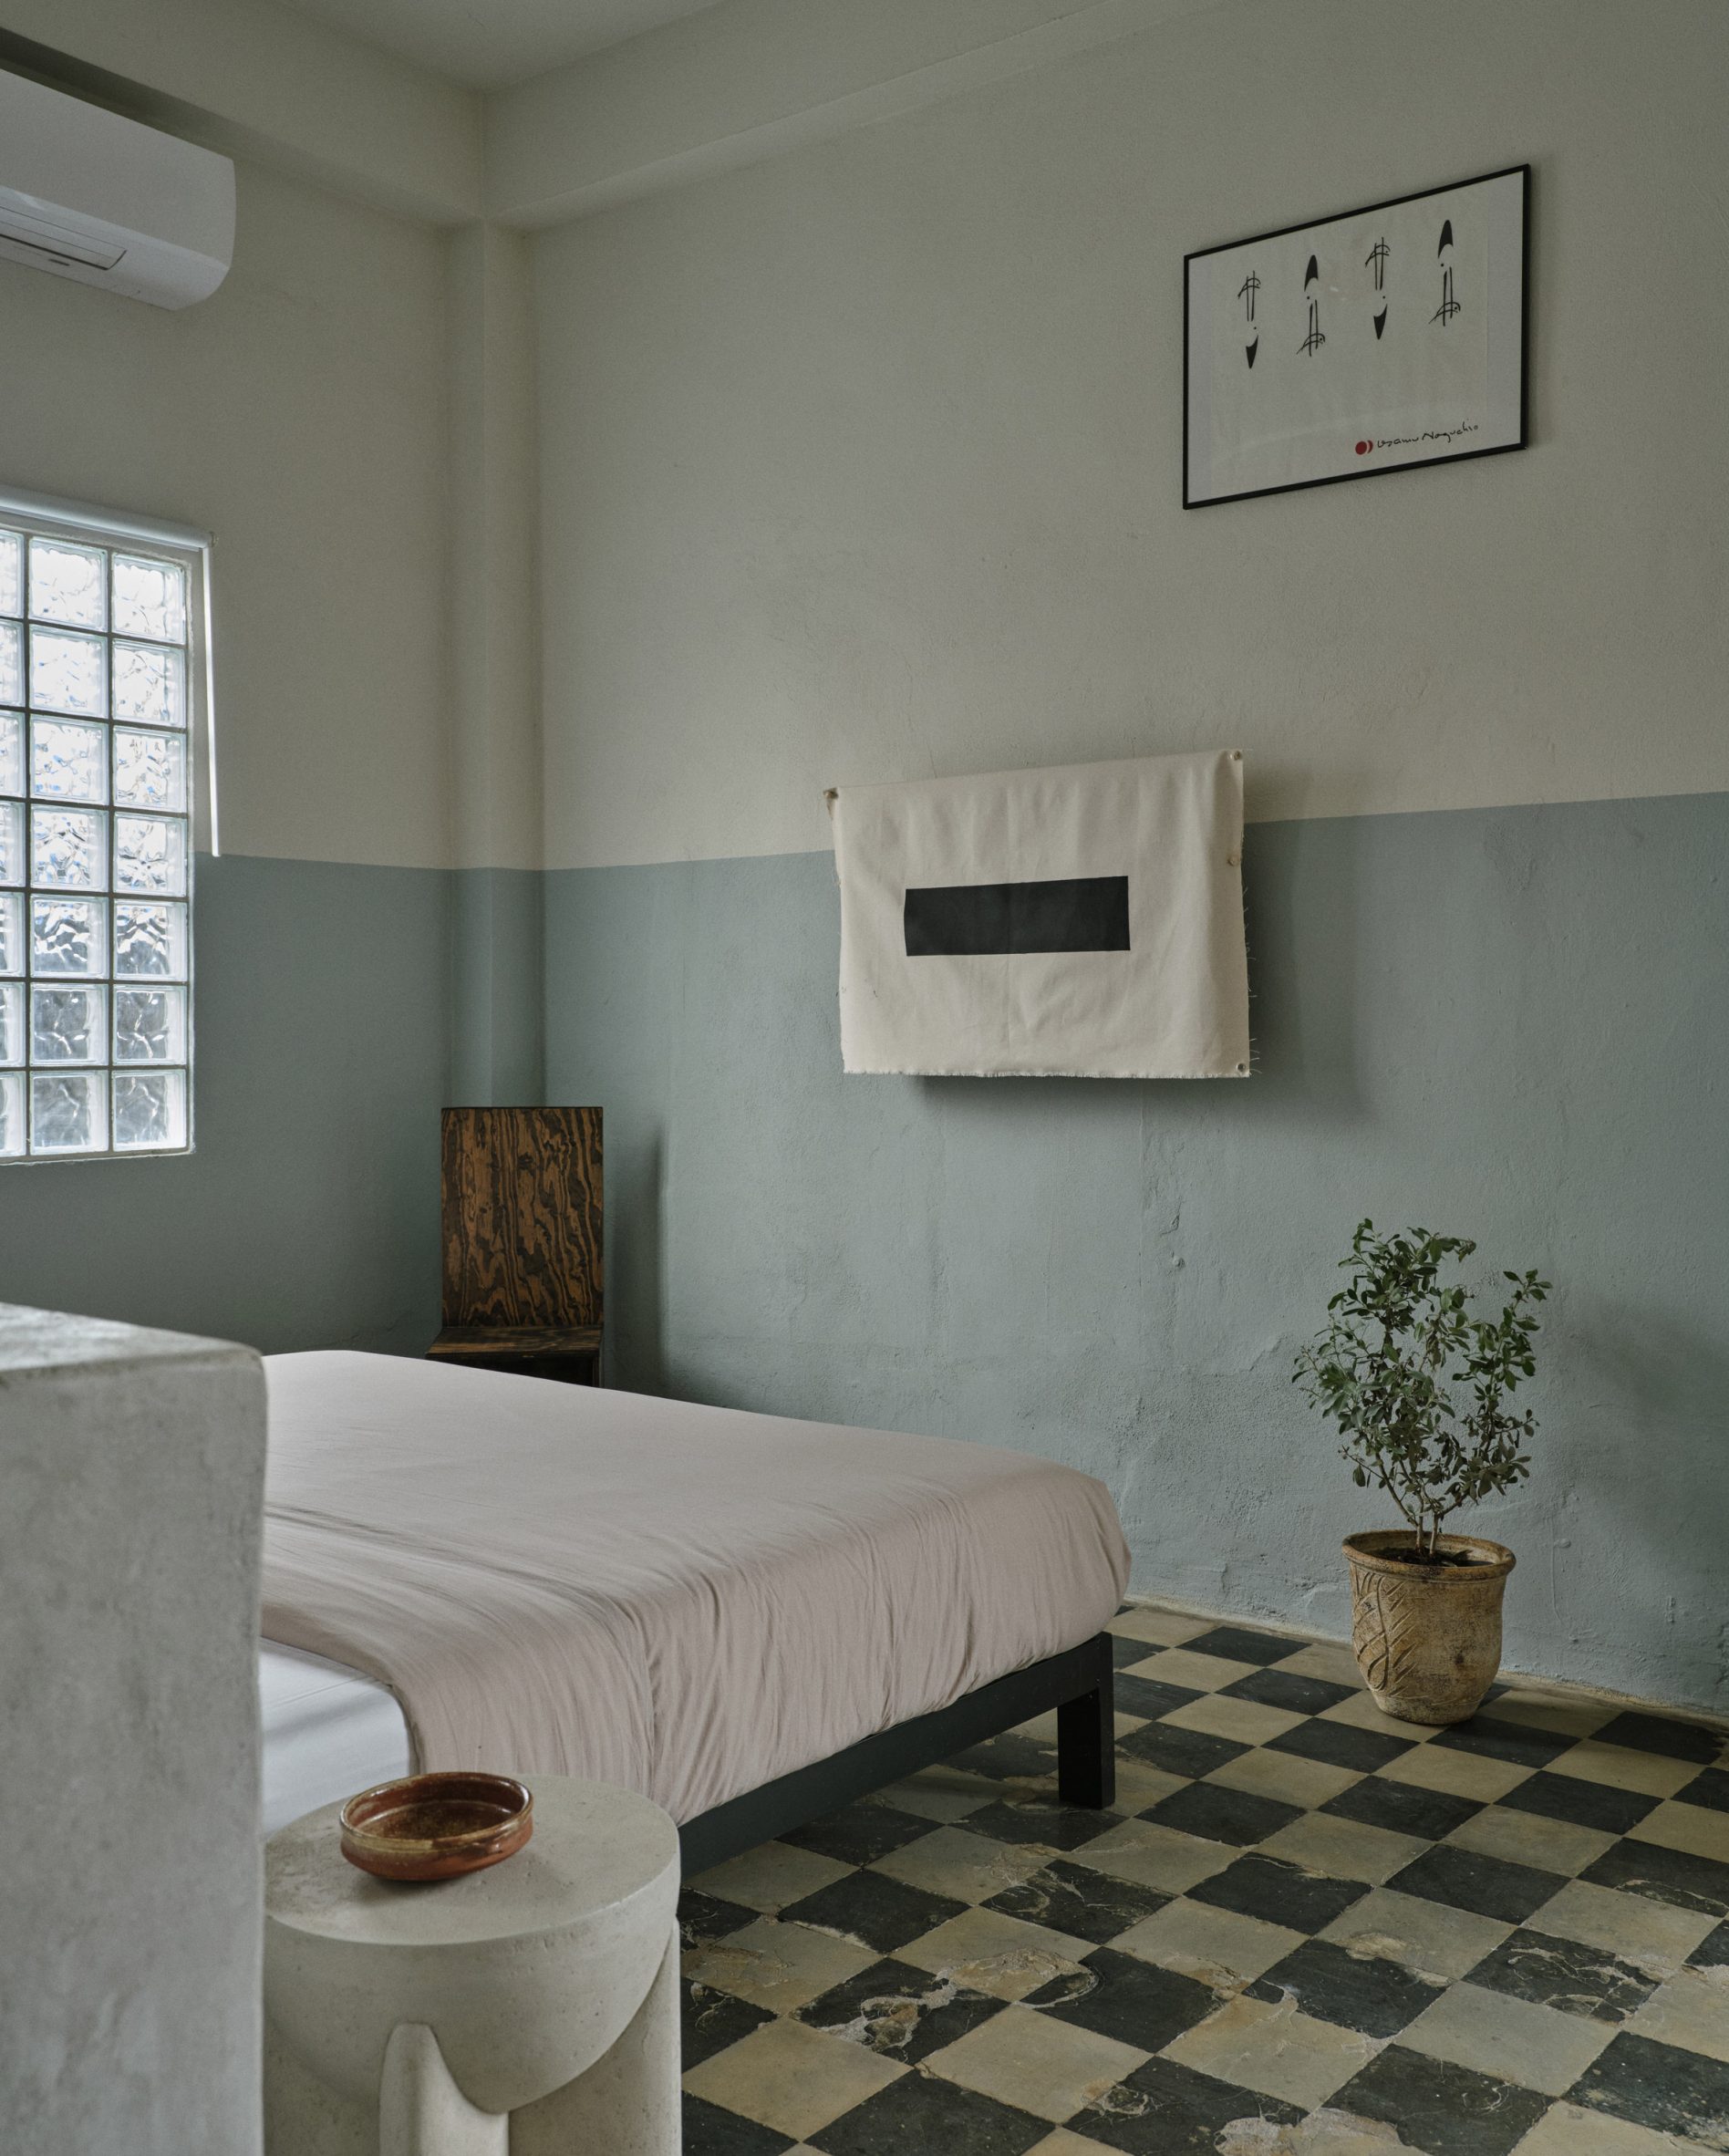 Studio apartment with vintage floor tiles, central bed and blue-beige walls